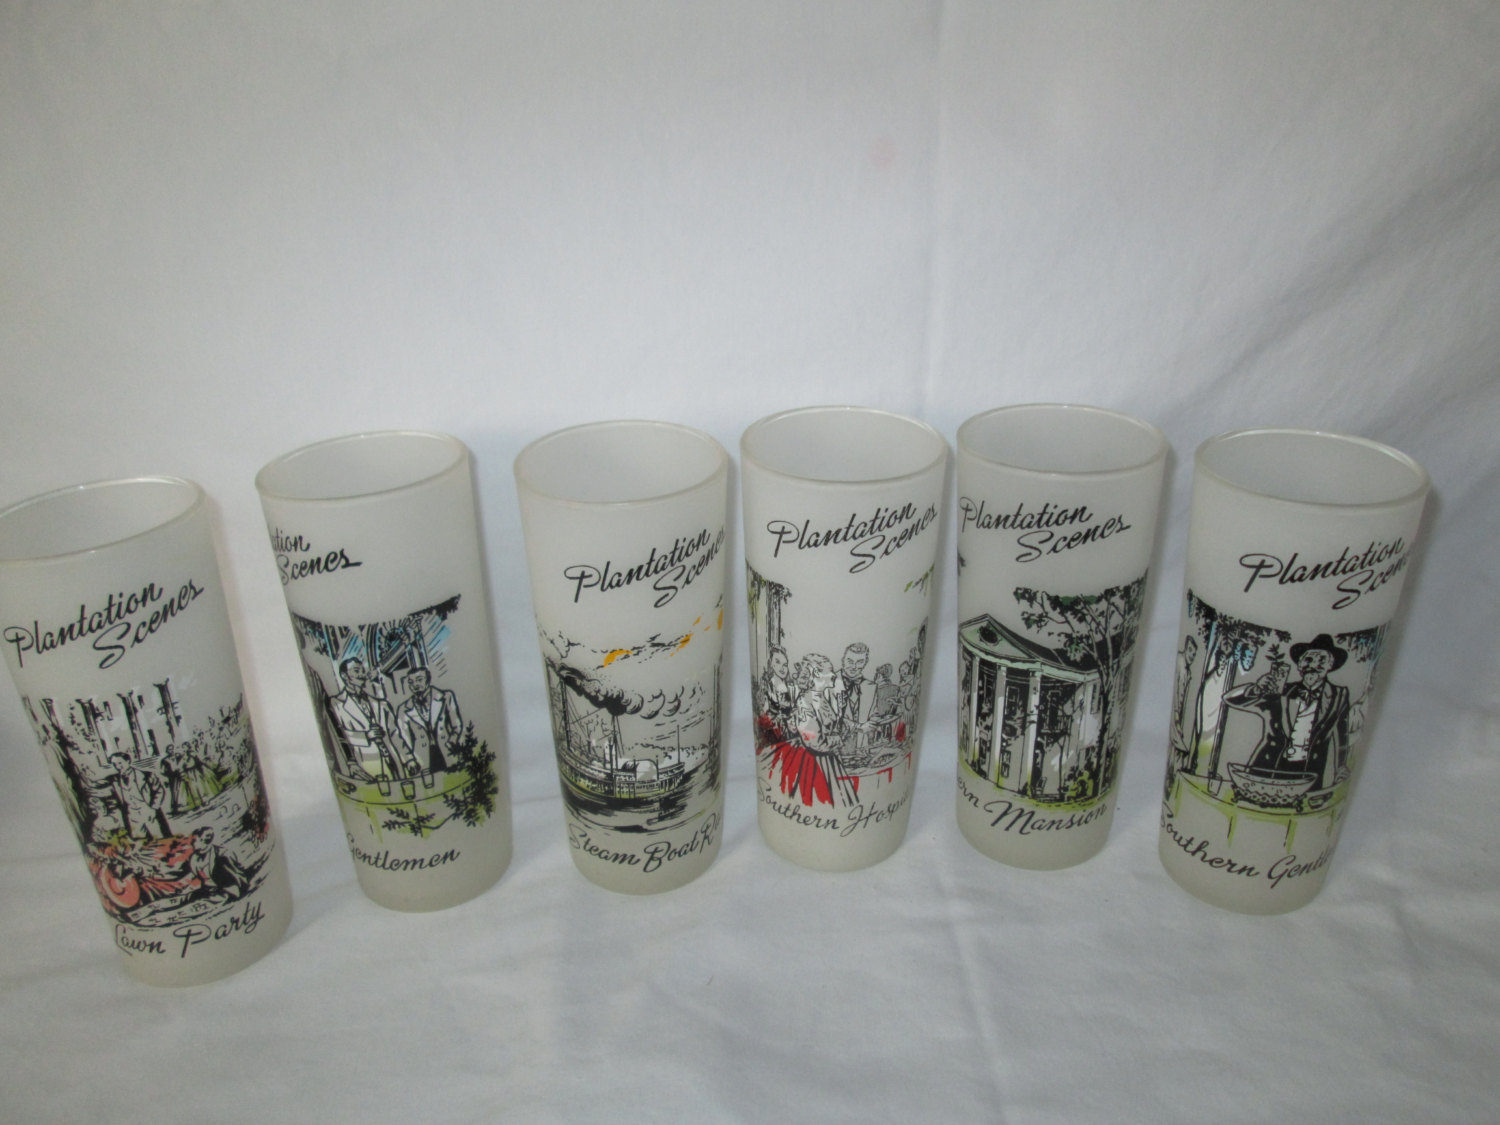 https://www.truevintageantiques.com/wp-content/uploads/2017/07/vintage-mid-century-tom-collins-great-iced-tea-glasses-southern-designs-set-of-6-tumblers-glasses-595ae6c21.jpg